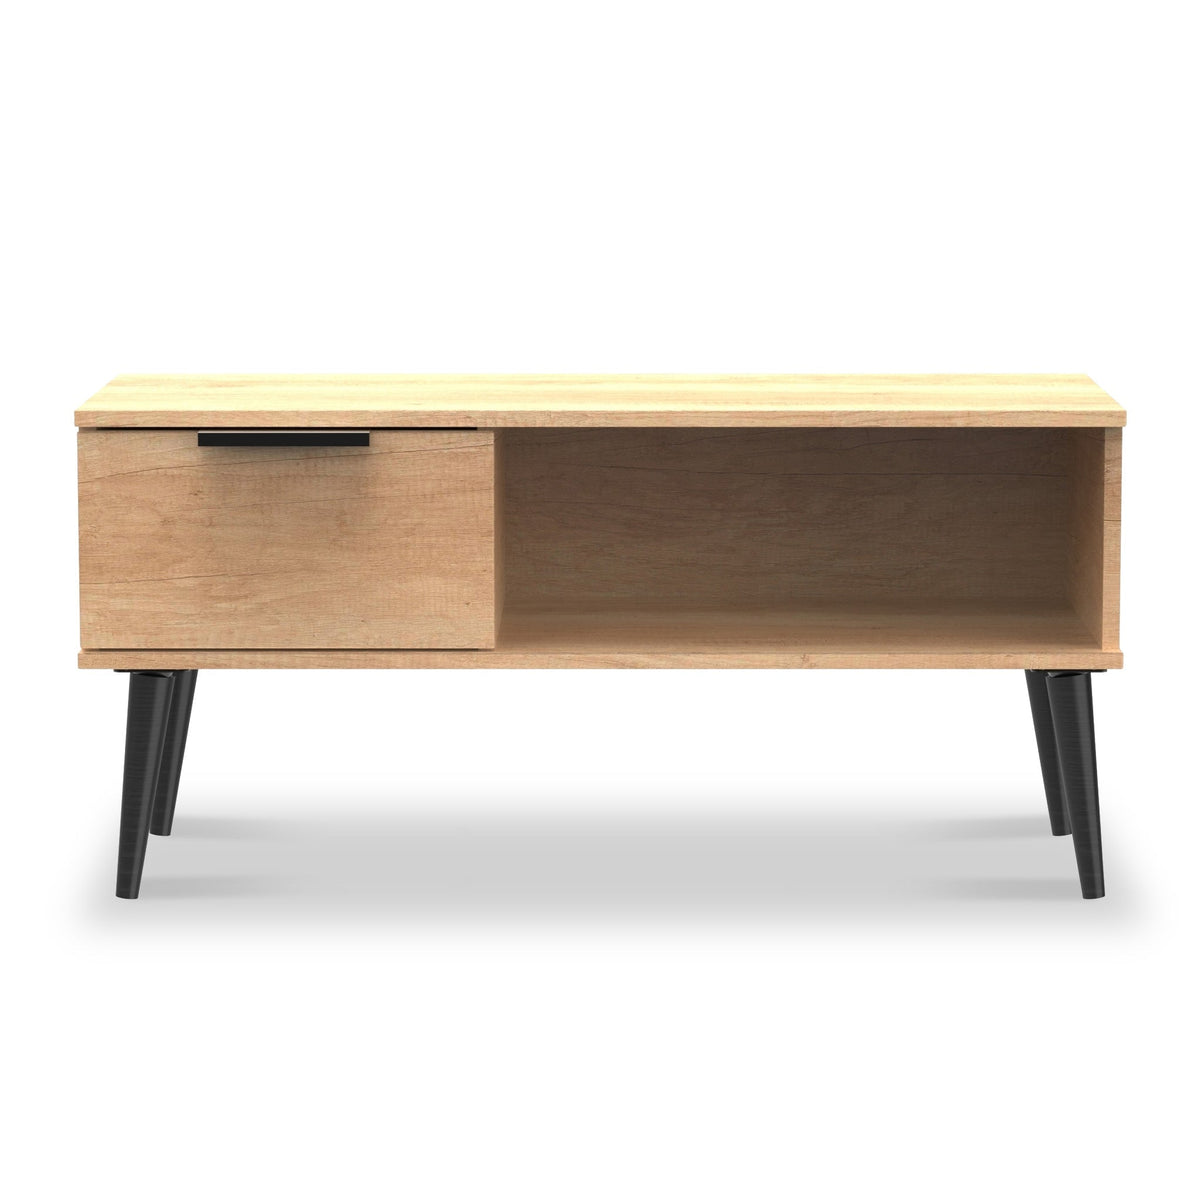 Asher Light Oak 1 Drawer Coffee table with Storage with black legs from Roseland Furniture